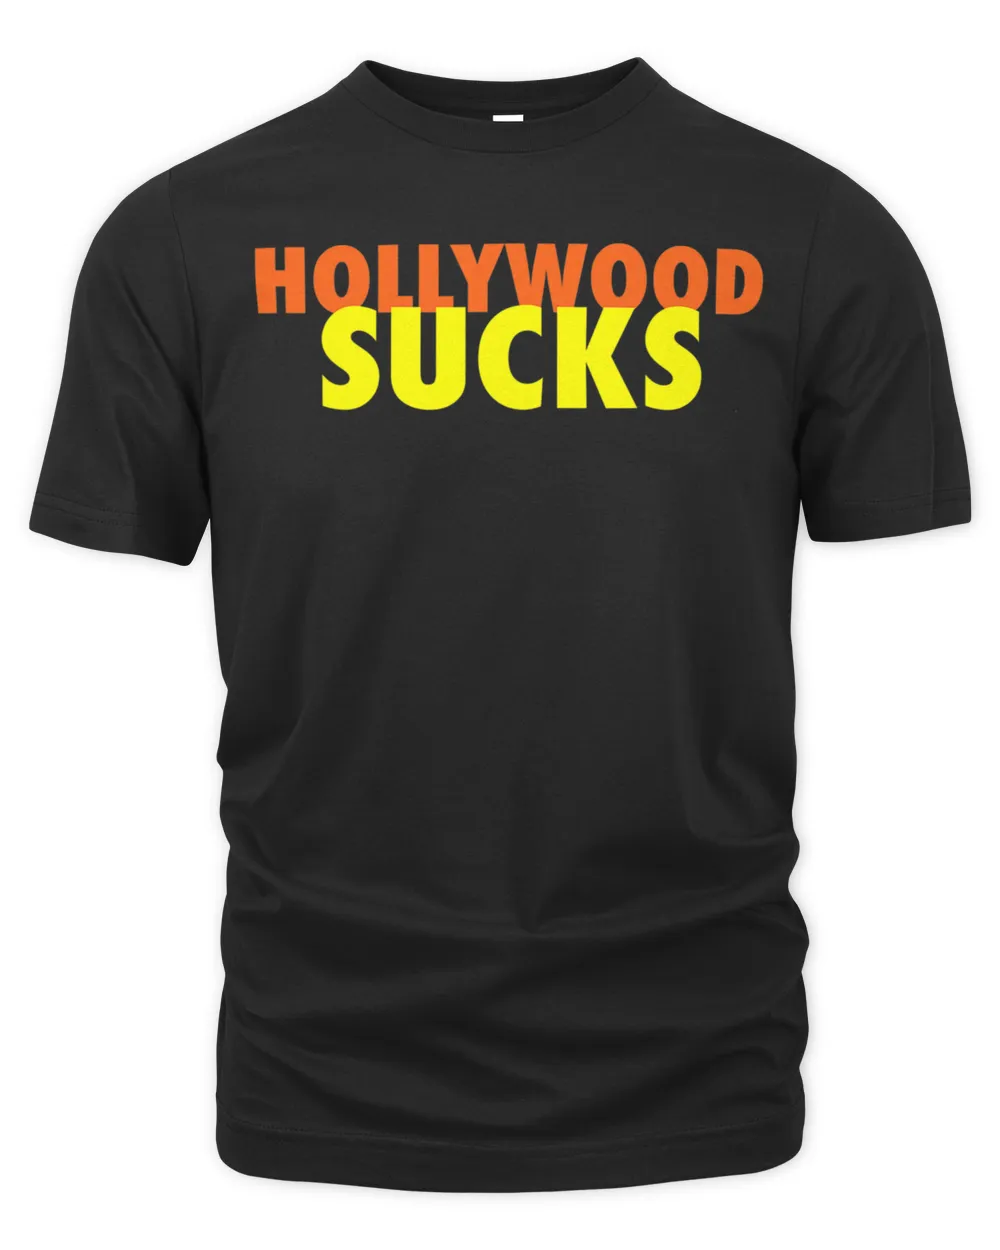 Hollywood Sucks Anti Millionaire Hollywood Actor And Actress T-Shirt